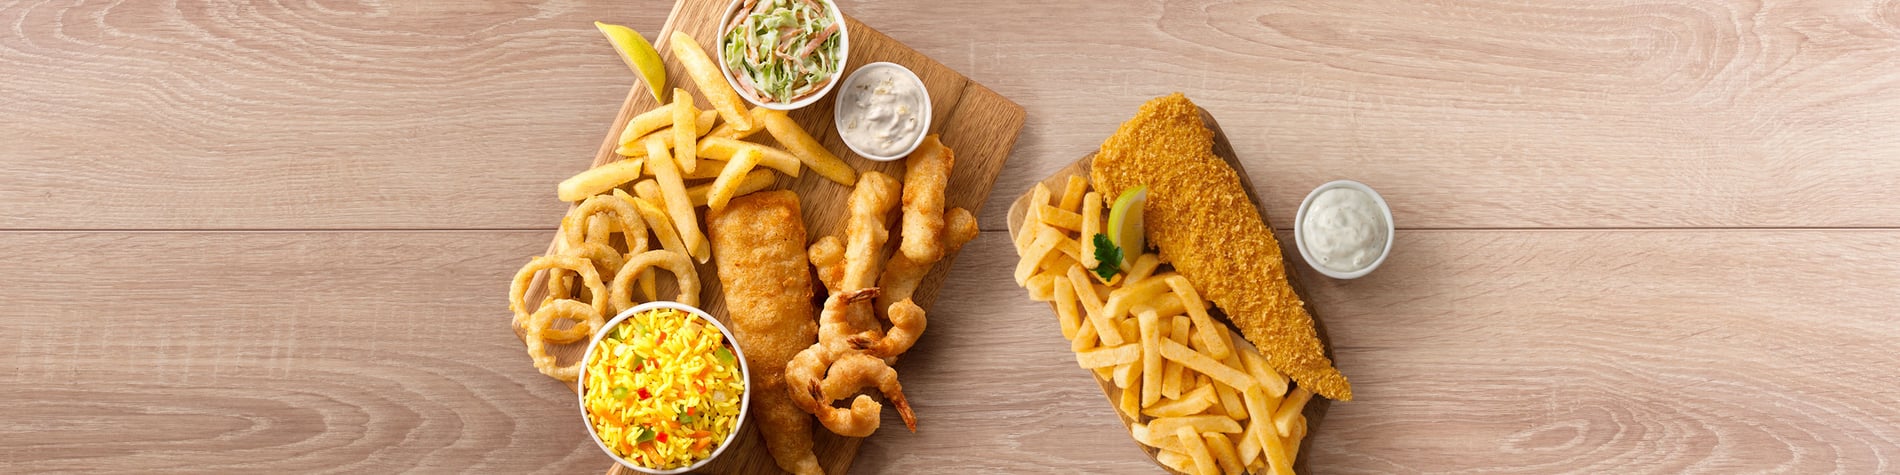 Seafood meals from Fishaways Hazyview including a Crunchy Fish and Chips meal and a seafood Platter for One with hake, calamari, prawns, chips, onion rings, and coleslaw.